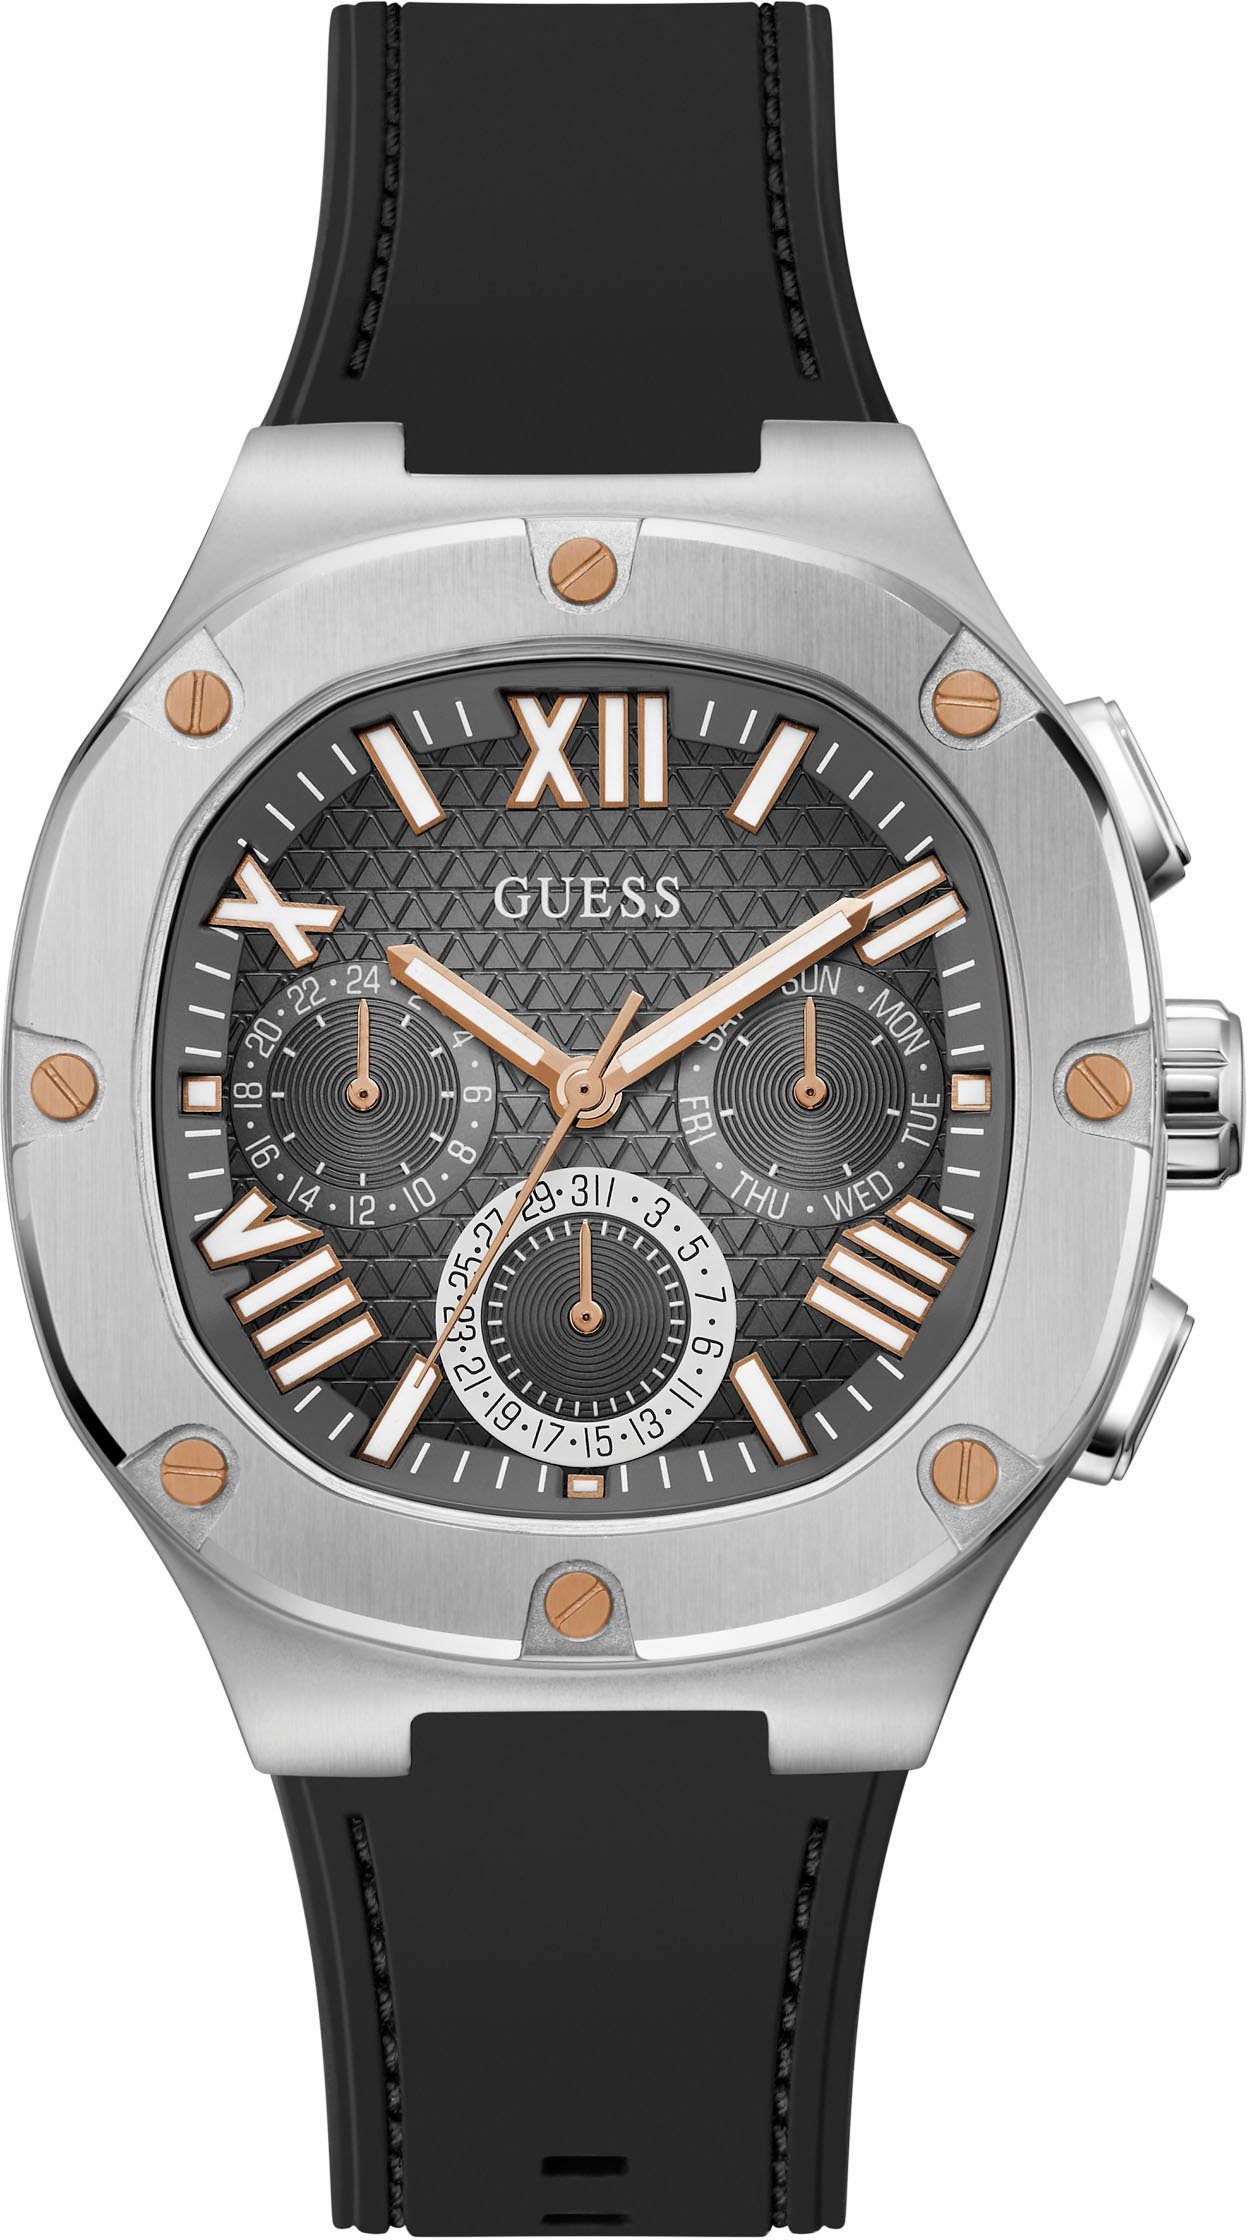 Multifunktionsuhr Guess GW0571G1